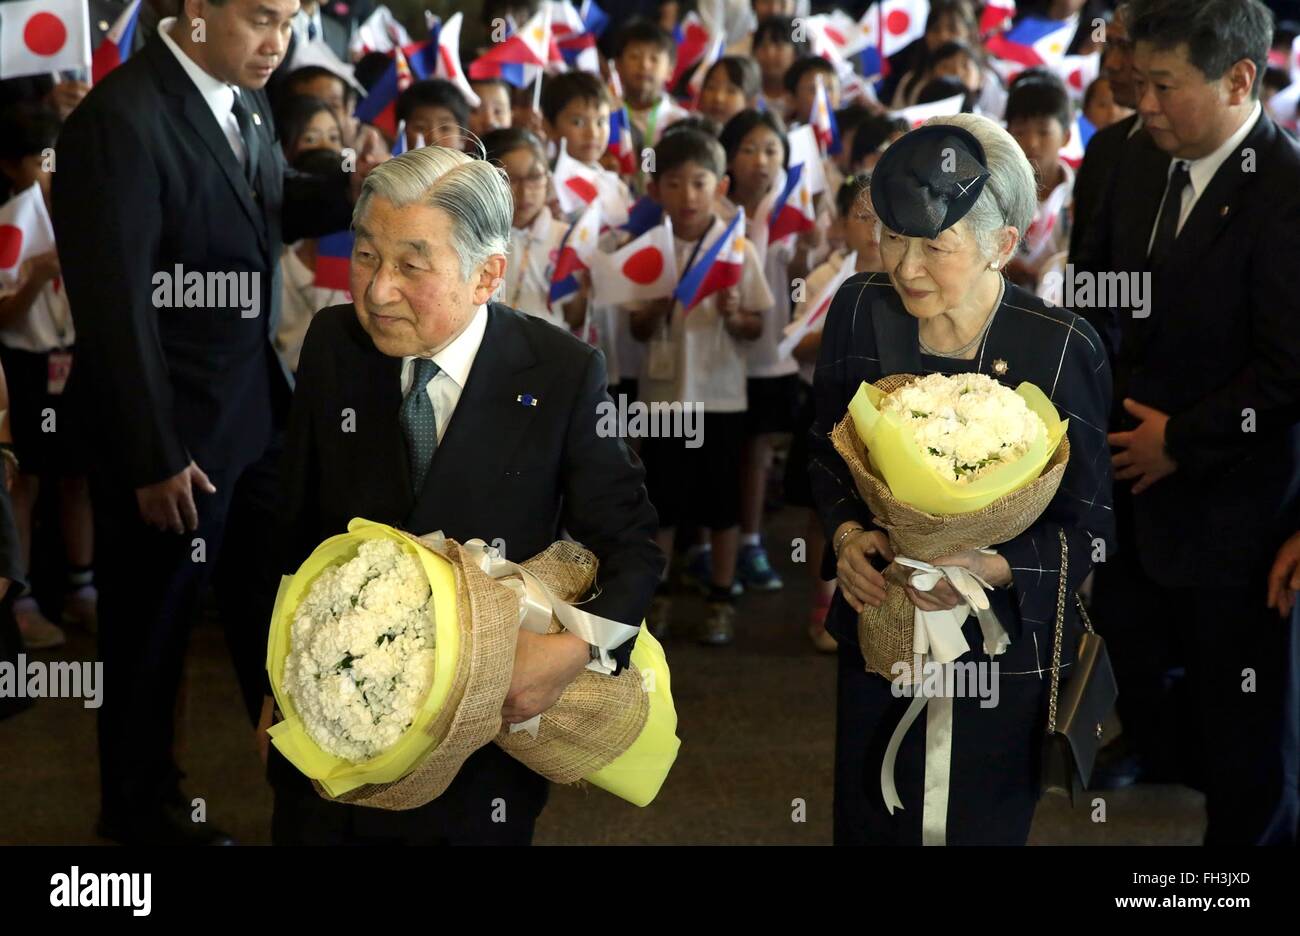 Japanese Emperor Akihito and his wife Empress Michiko are welcomed by students of the Manila Japanese School at Sofitel Philippine Plaza January 26, 2016 in Manila, Philippines. The Imperial Couple are on a five-day state visit marking the 60th anniversary of Philippine-Japanese diplomatic relations. Stock Photo